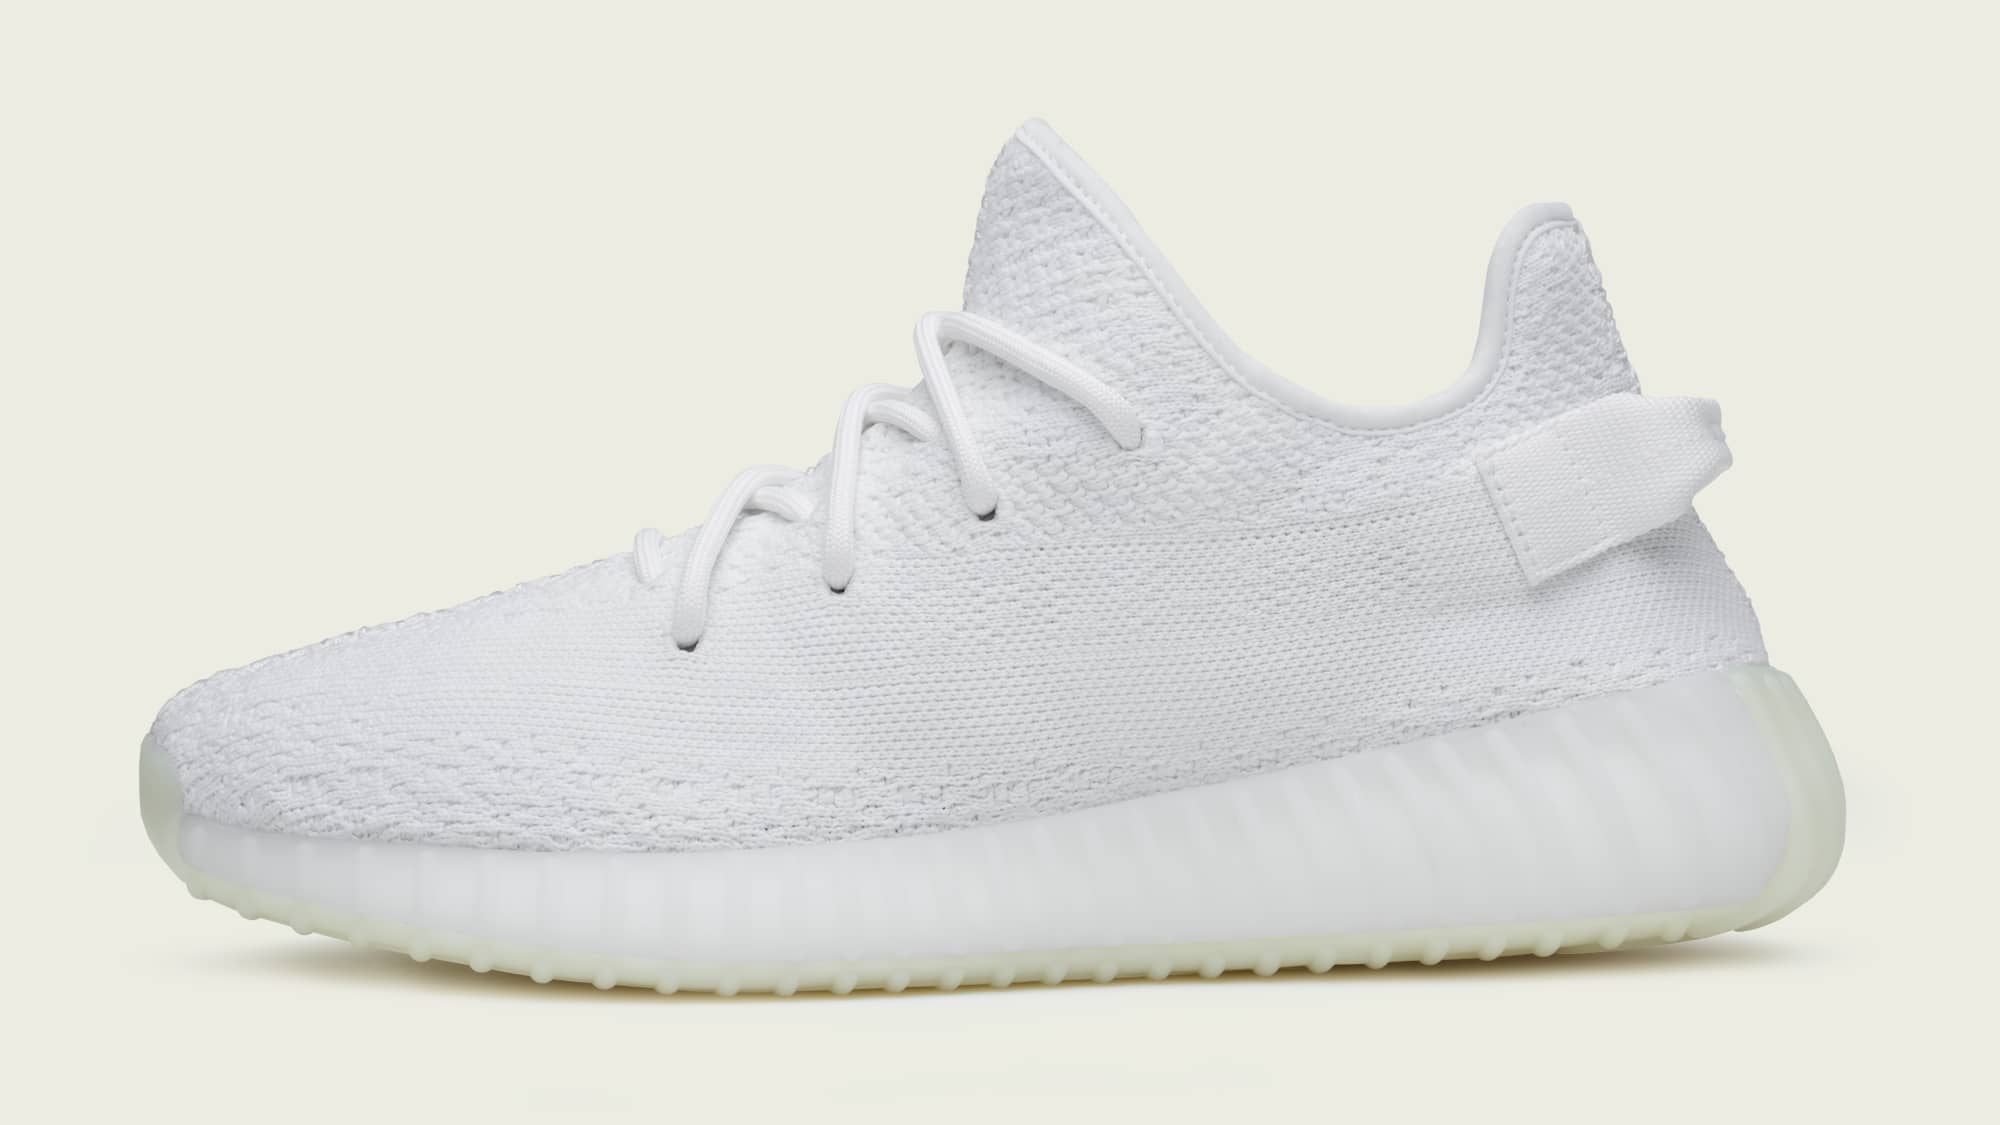 Adidas Yeezy Boost 350 V2 'Cream White' CP9366 2018 Re-Release ...